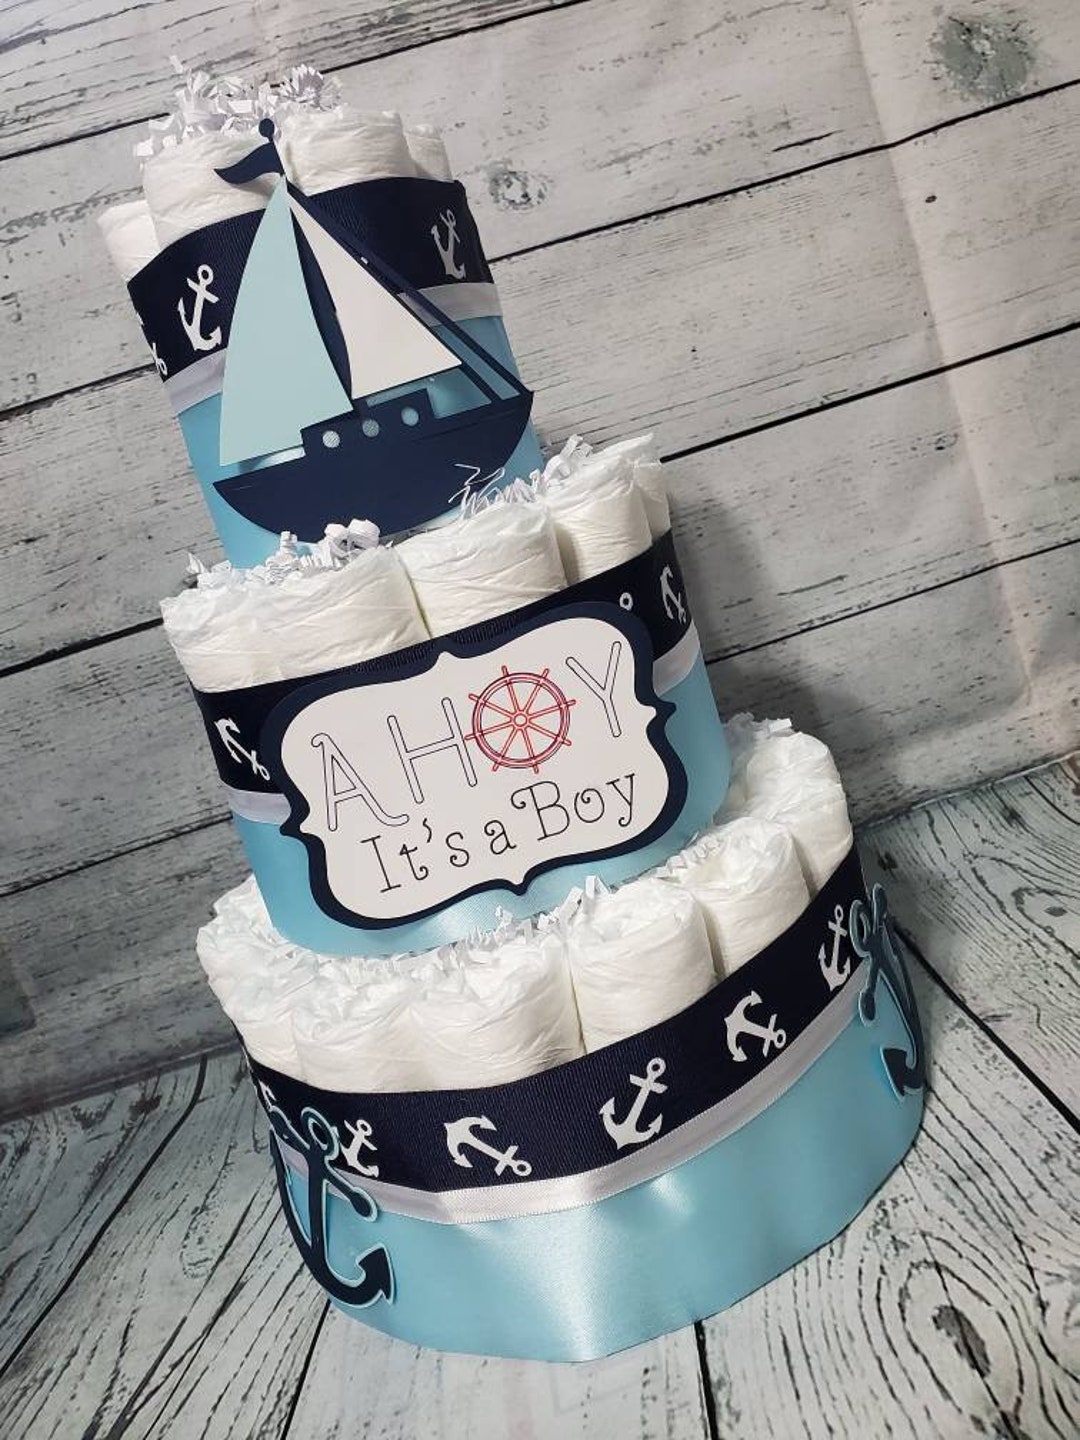 3 Tier Diaper Cake Nautical Theme Navy Blue and White Ship and Anchor, Ahoy  Its a Boy Diaper Cake Baby Shower Centerpiece 